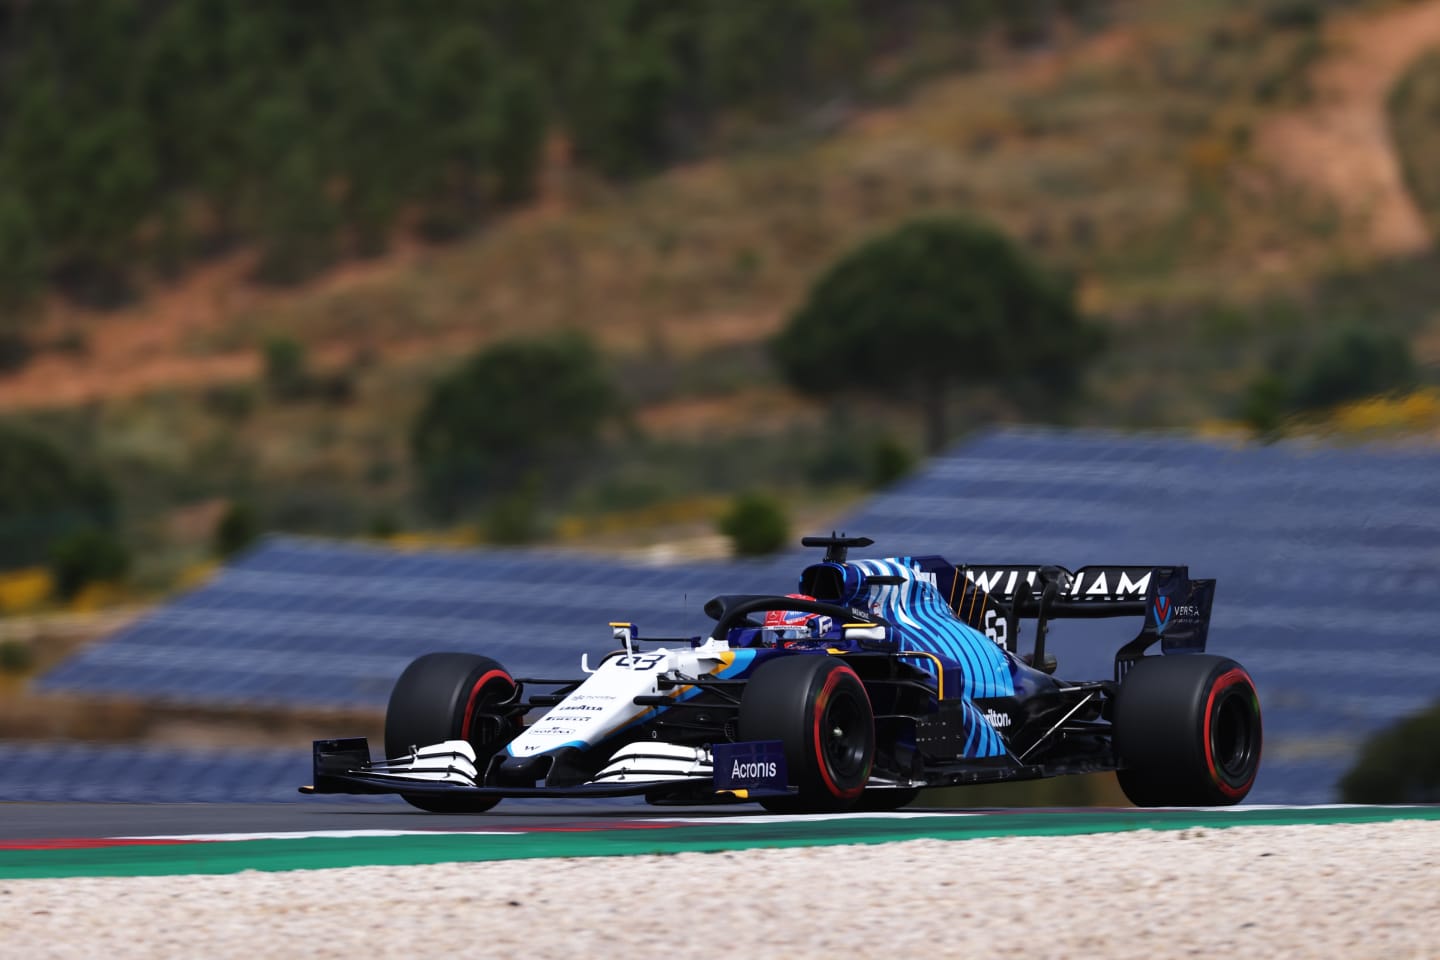 PORTIMAO, PORTUGAL - MAY 01: George Russell of Great Britain driving the (63) Williams Racing FW43B Mercedes on track during final practice for the F1 Grand Prix of Portugal at Autodromo Internacional Do Algarve on May 01, 2021 in Portimao, Portugal. (Photo by Lars Baron/Getty Images)